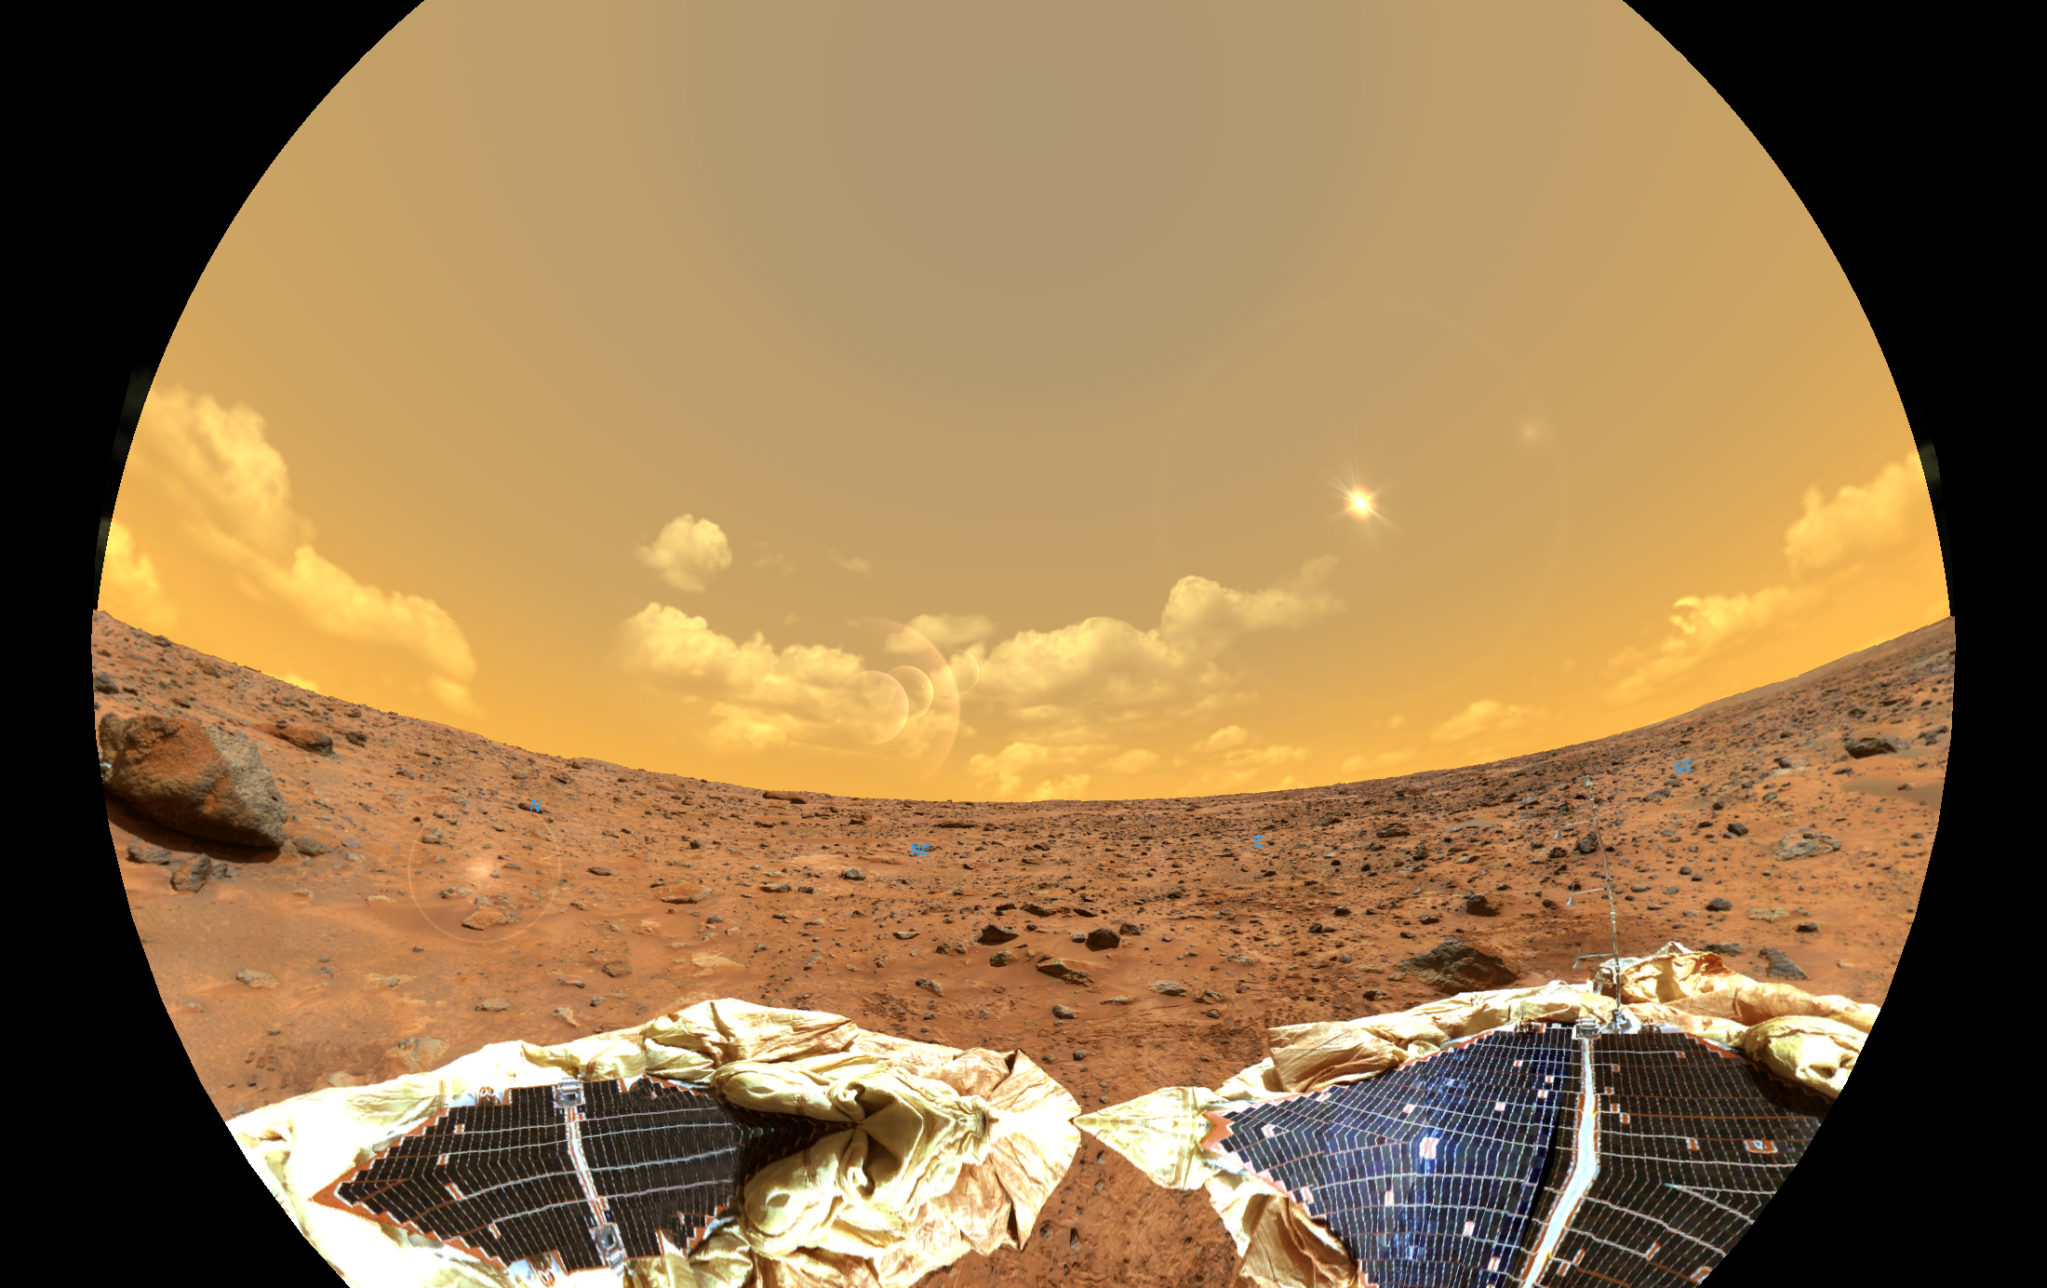 A computer-generated image from Marshall’s Meteoroid Environments Office shows the view from Acidia Planetia on Mars.